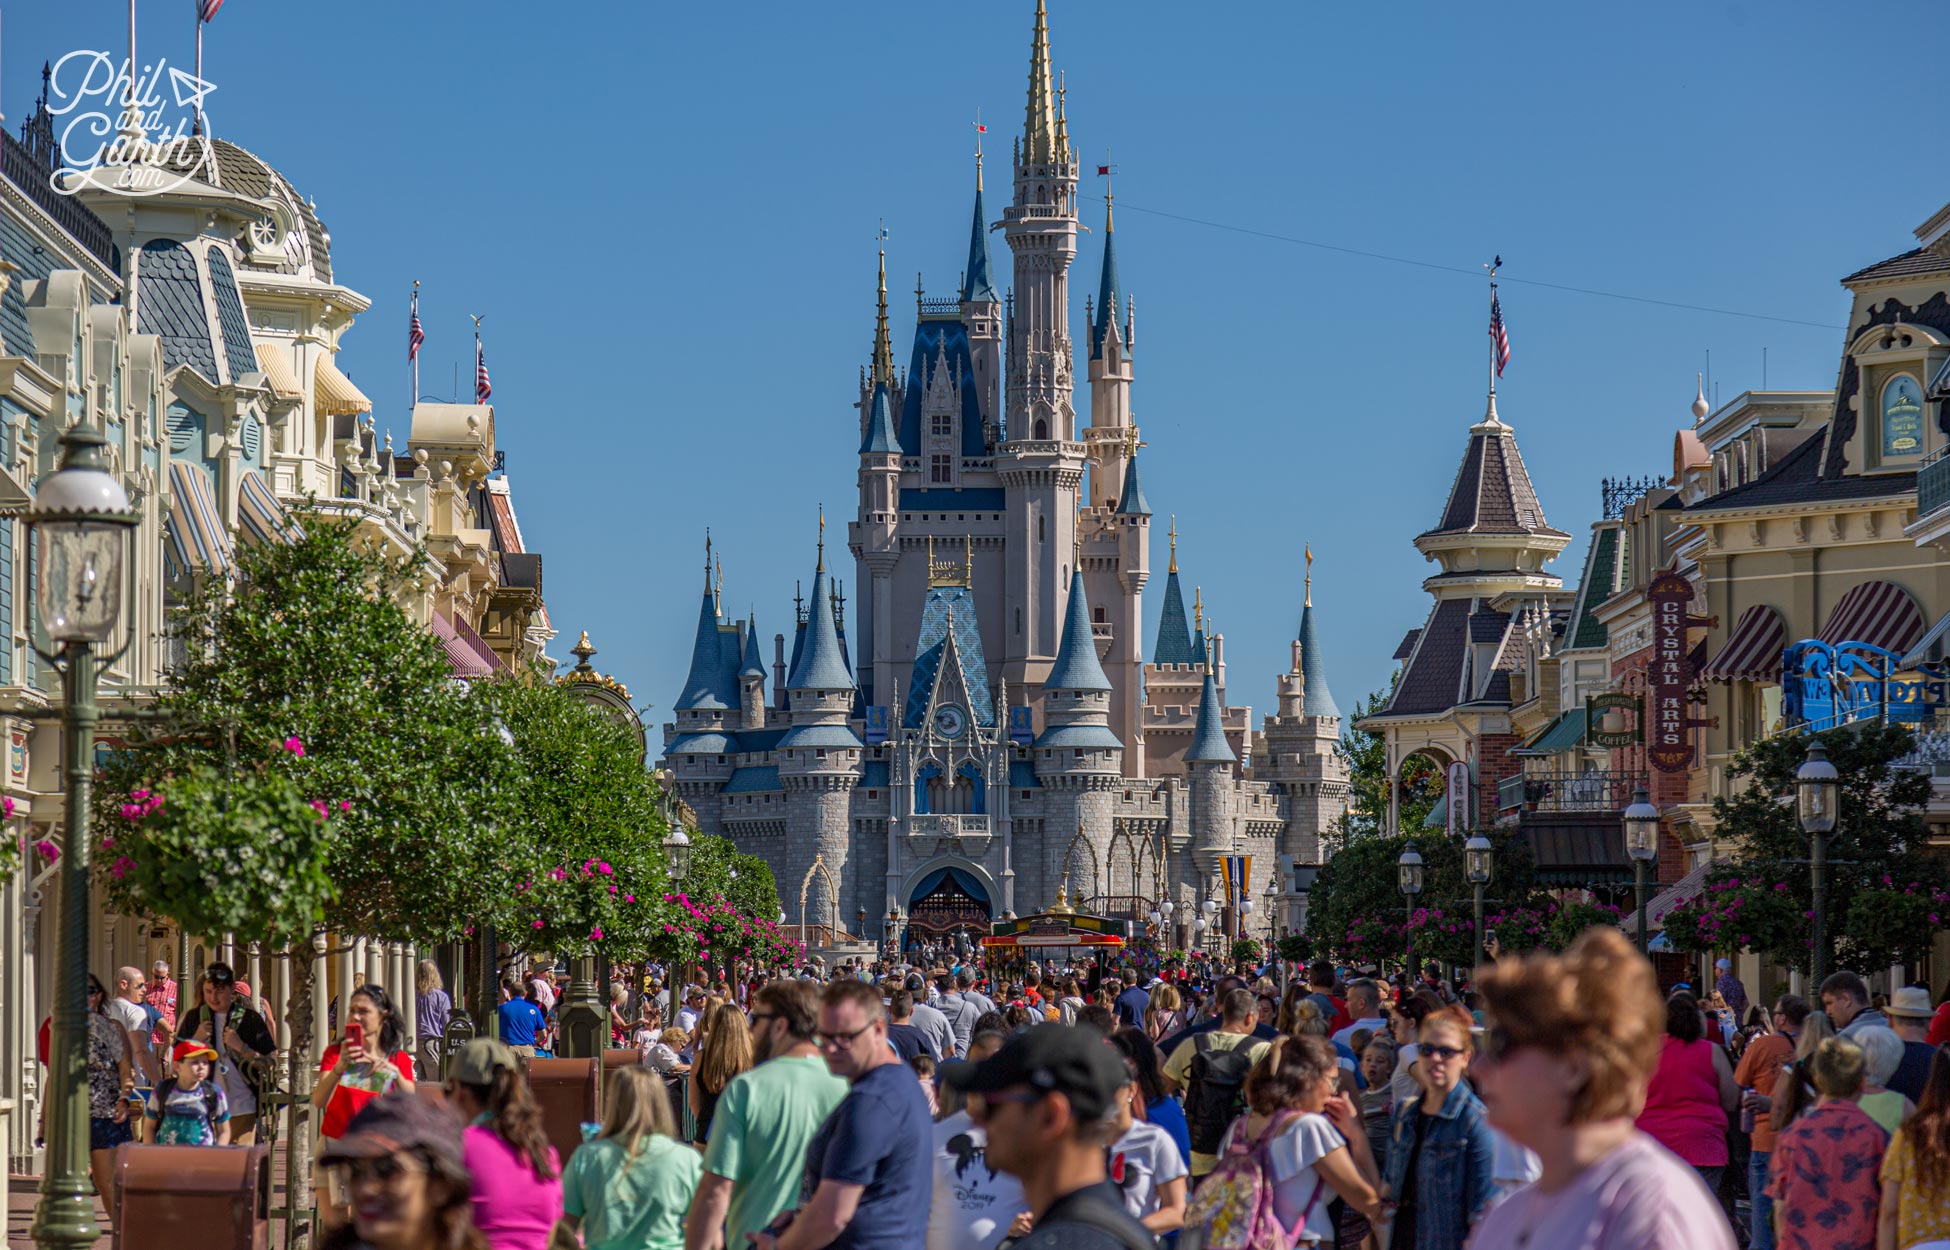 Magic Kingdom's iconic Cinderella Castle as seen from Main Street USA